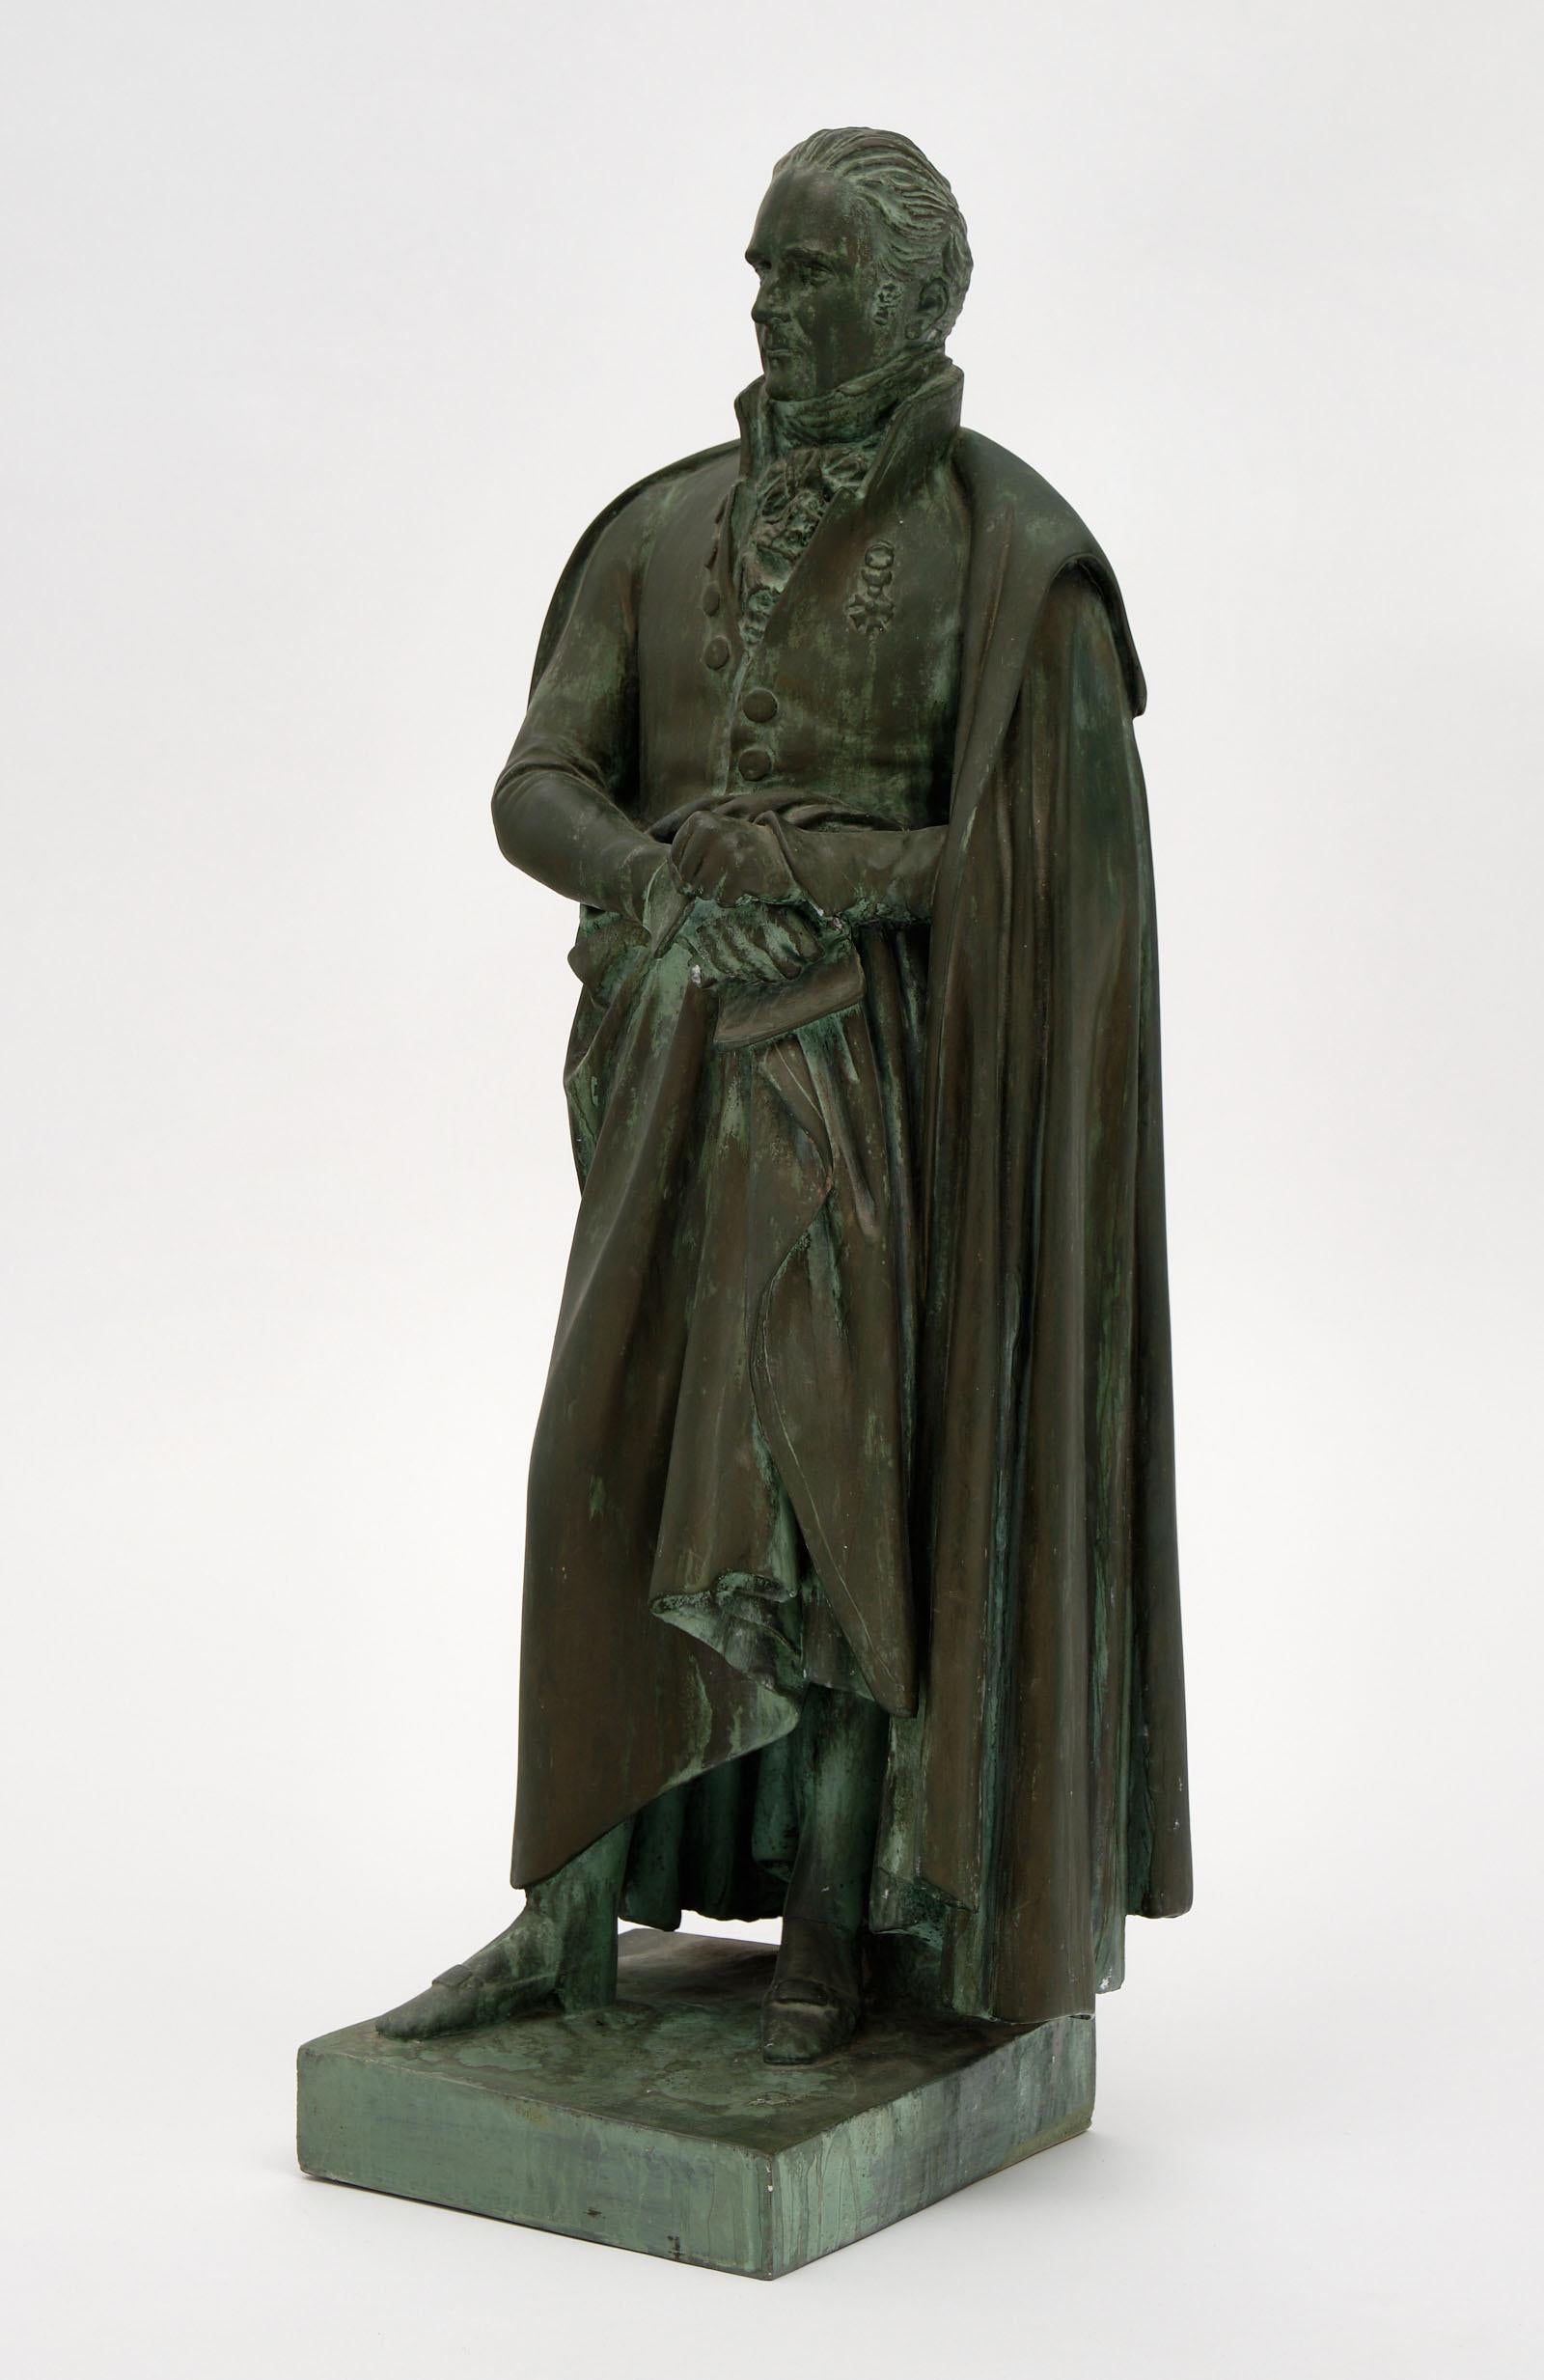 Sculpture of French Empire general made of terracotta with a bronze patina.